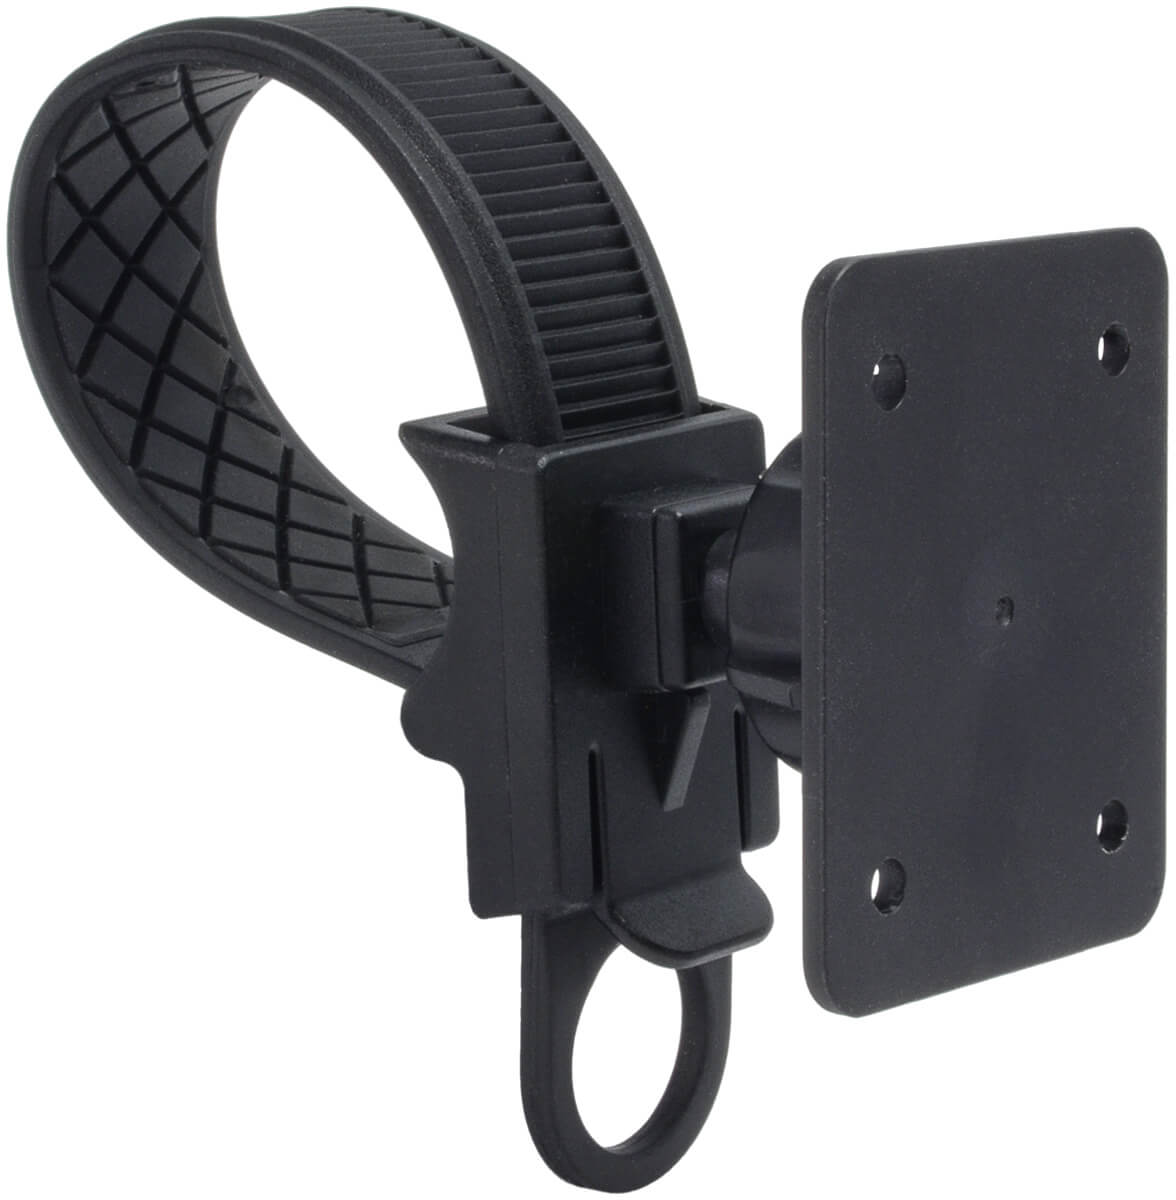 SiriusXM Radio receiver attached to the strap mount